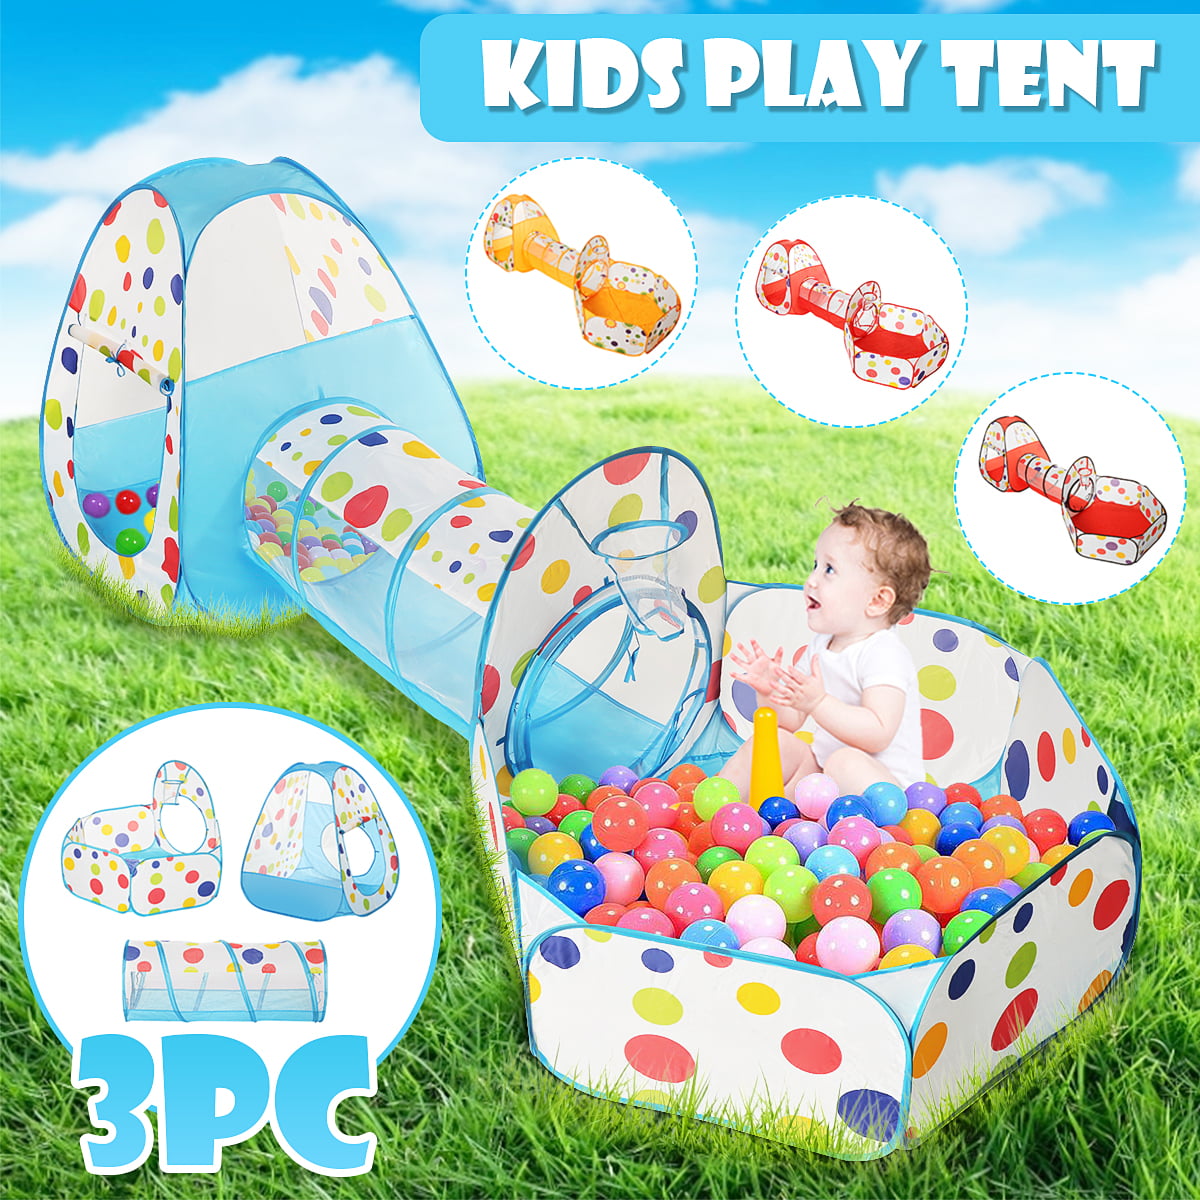 Portable 3 in 1 Childrens Kids Baby Play Tent Tunnel Ball Pit Playhouse Pop Up 